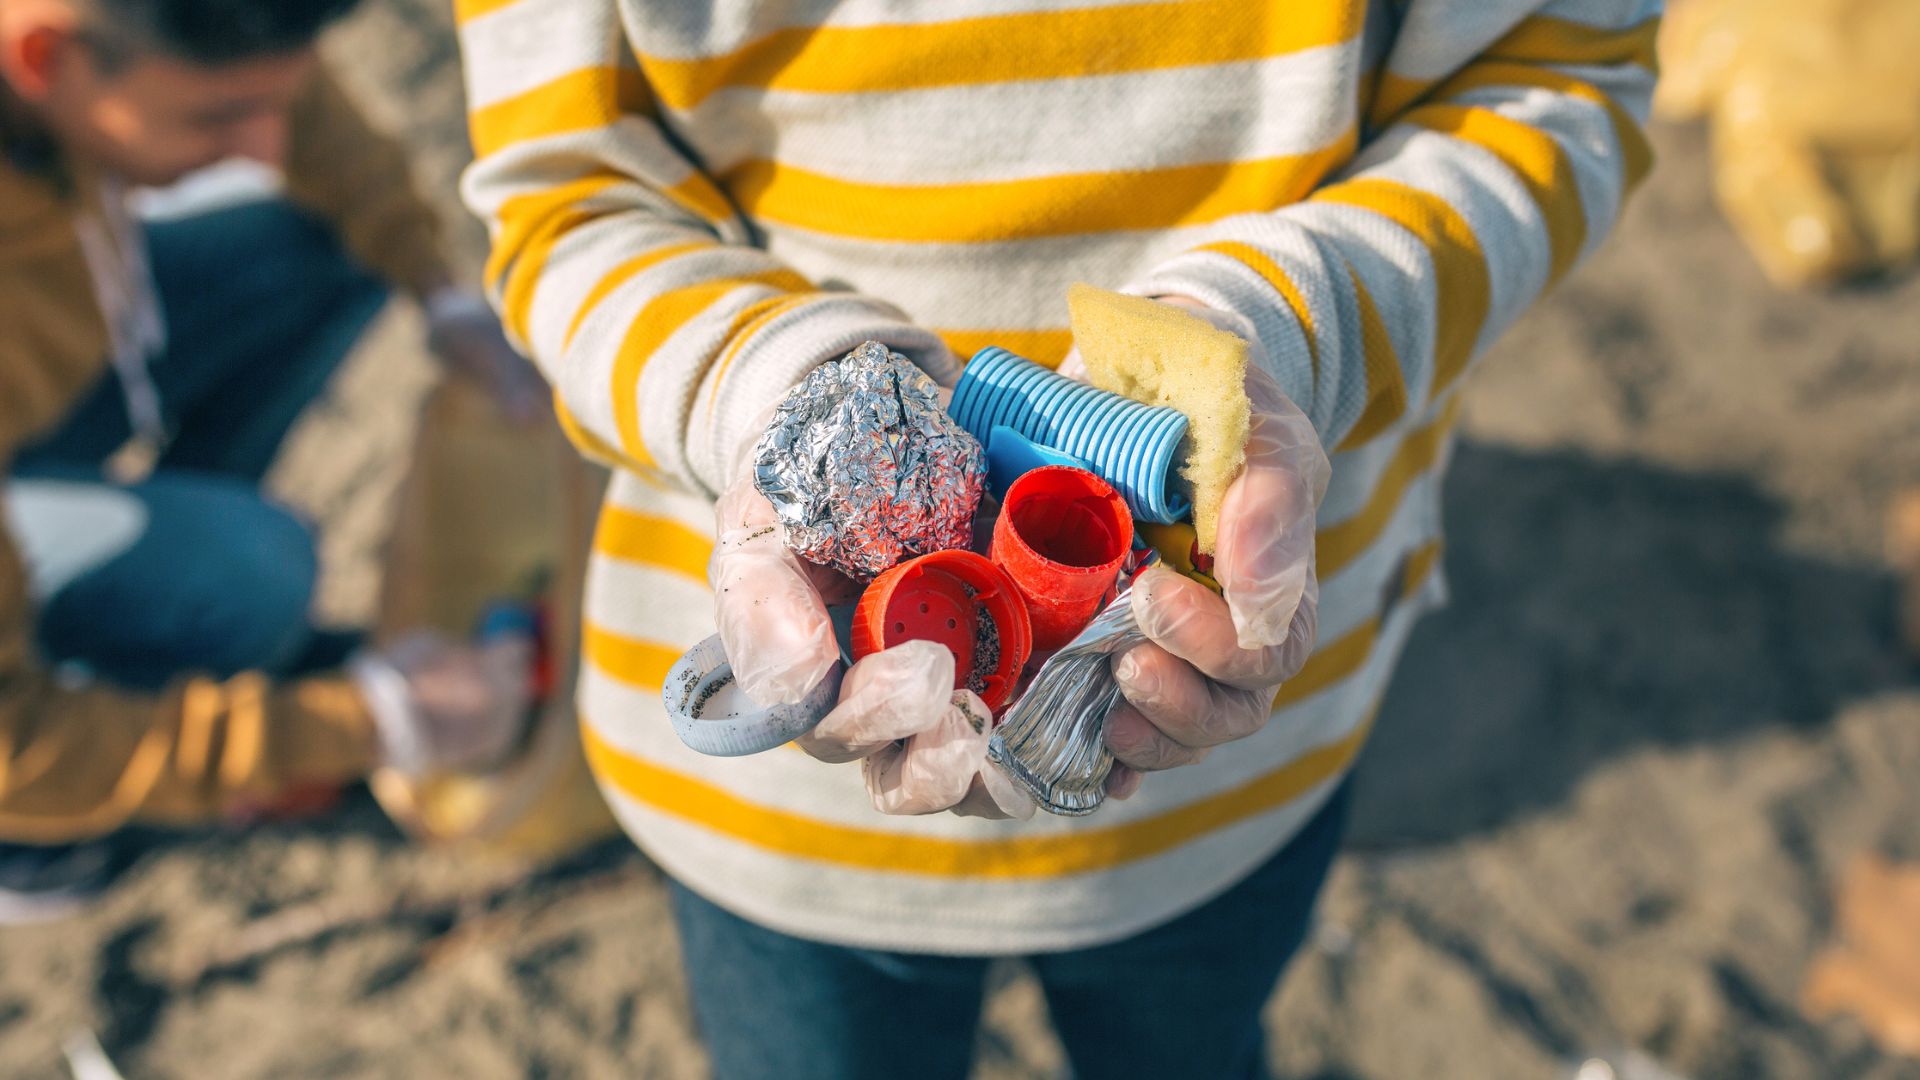 A woman showing the litter she has picked up from a beach clean